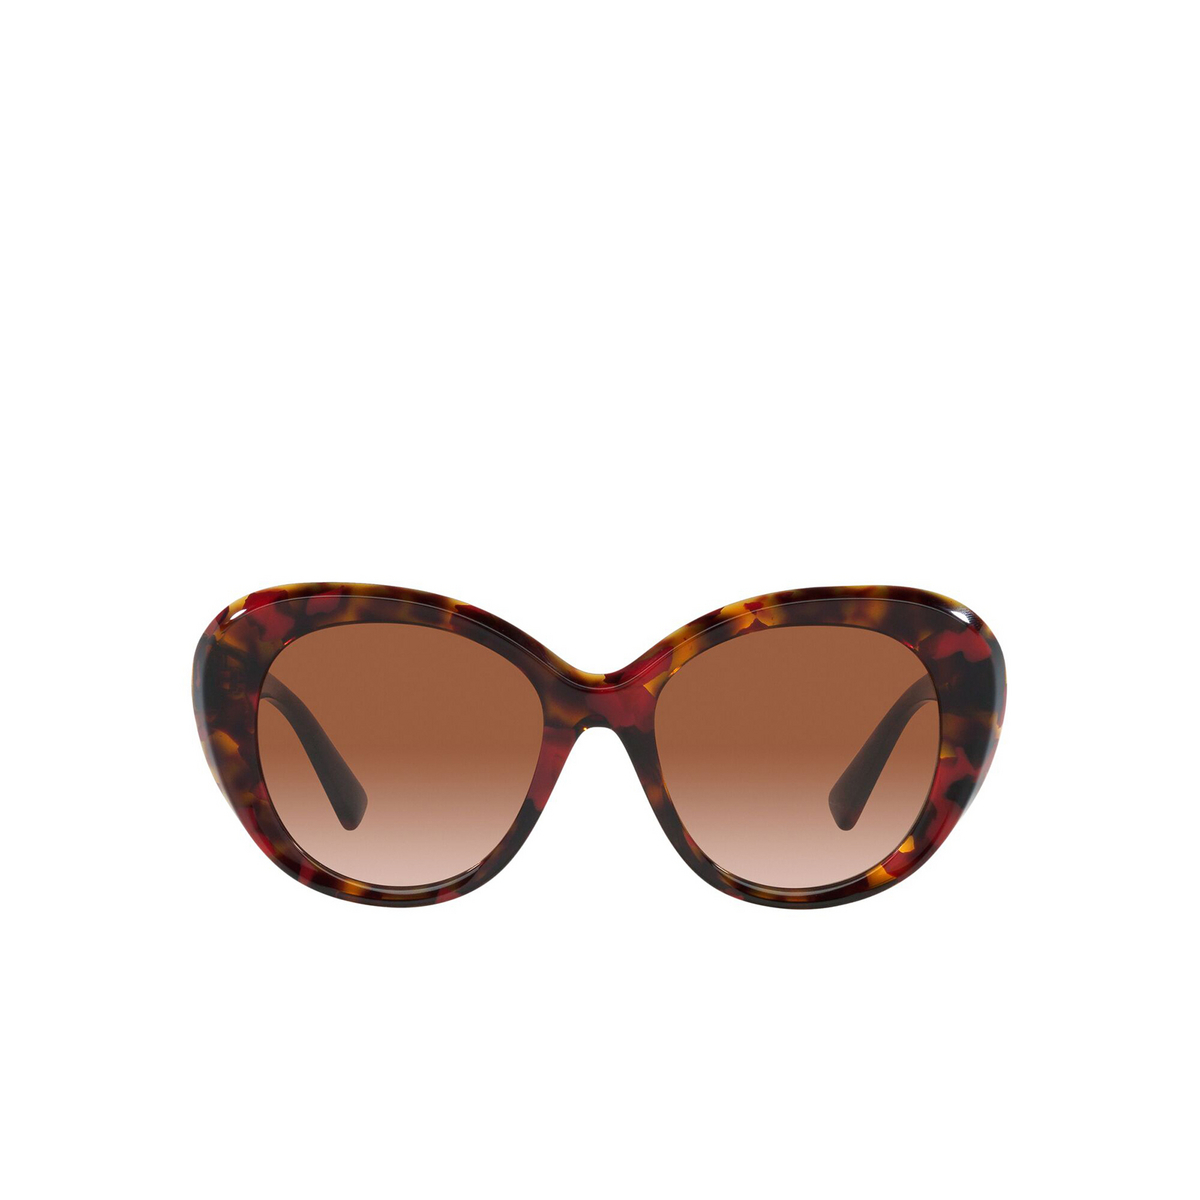 Valentino® Butterfly Sunglasses: VA4113 color Red Havana 518913 - front view.